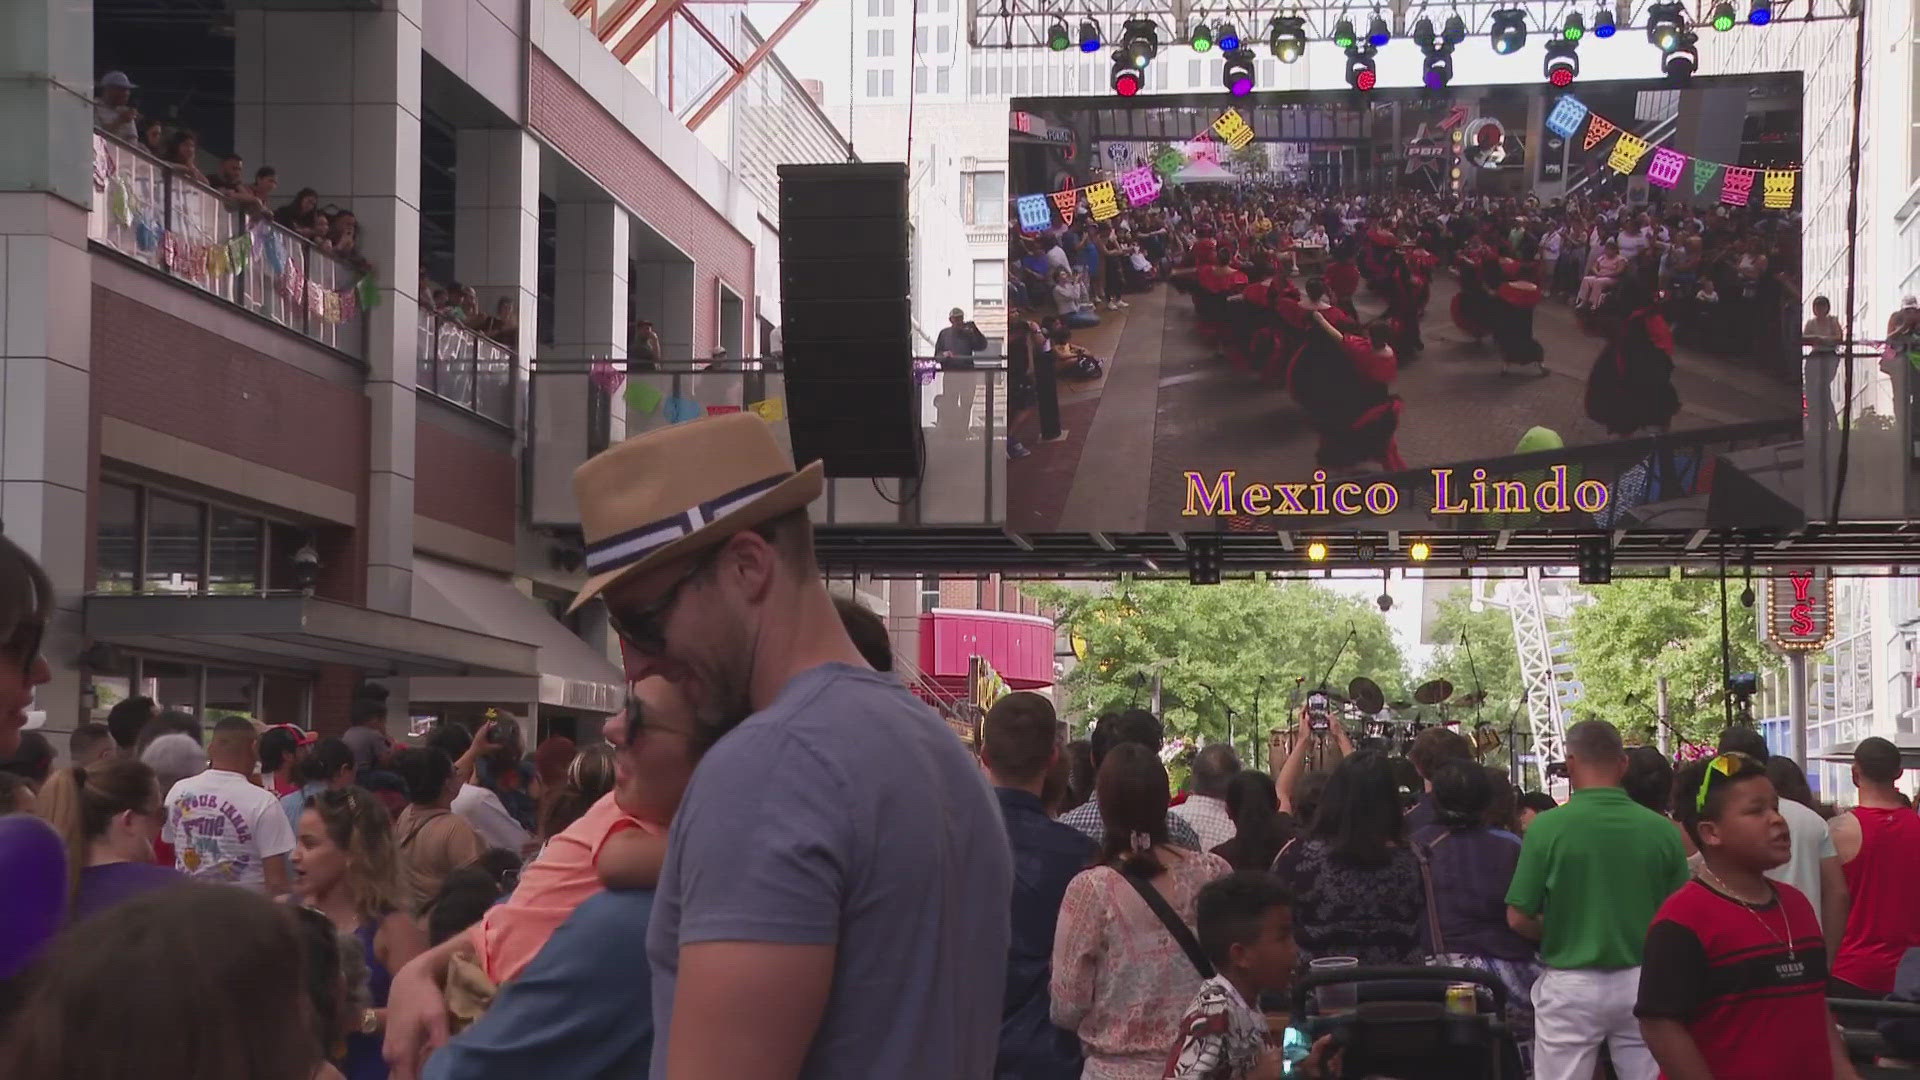 One day after Derby 150, the celebrations continued in the heart of downtown, on Fourth Street Live! for Cinco De Mayo.